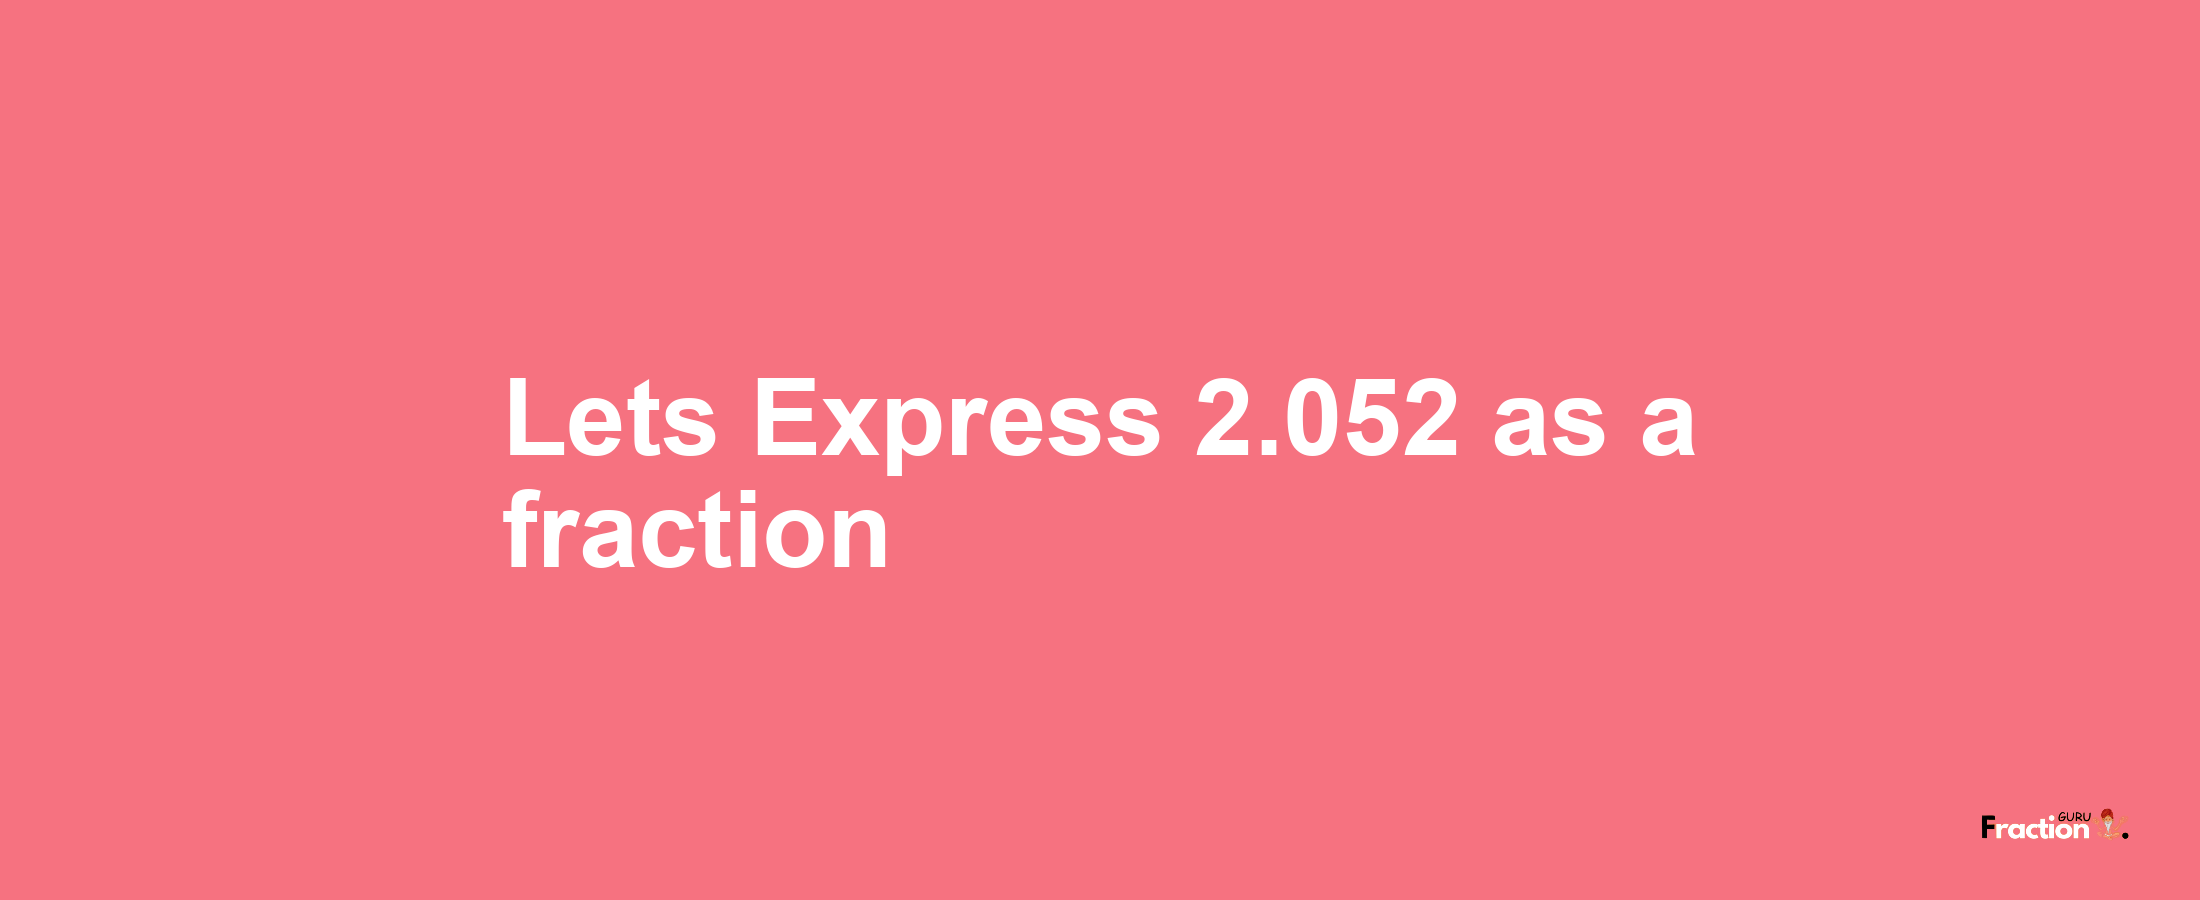 Lets Express 2.052 as afraction